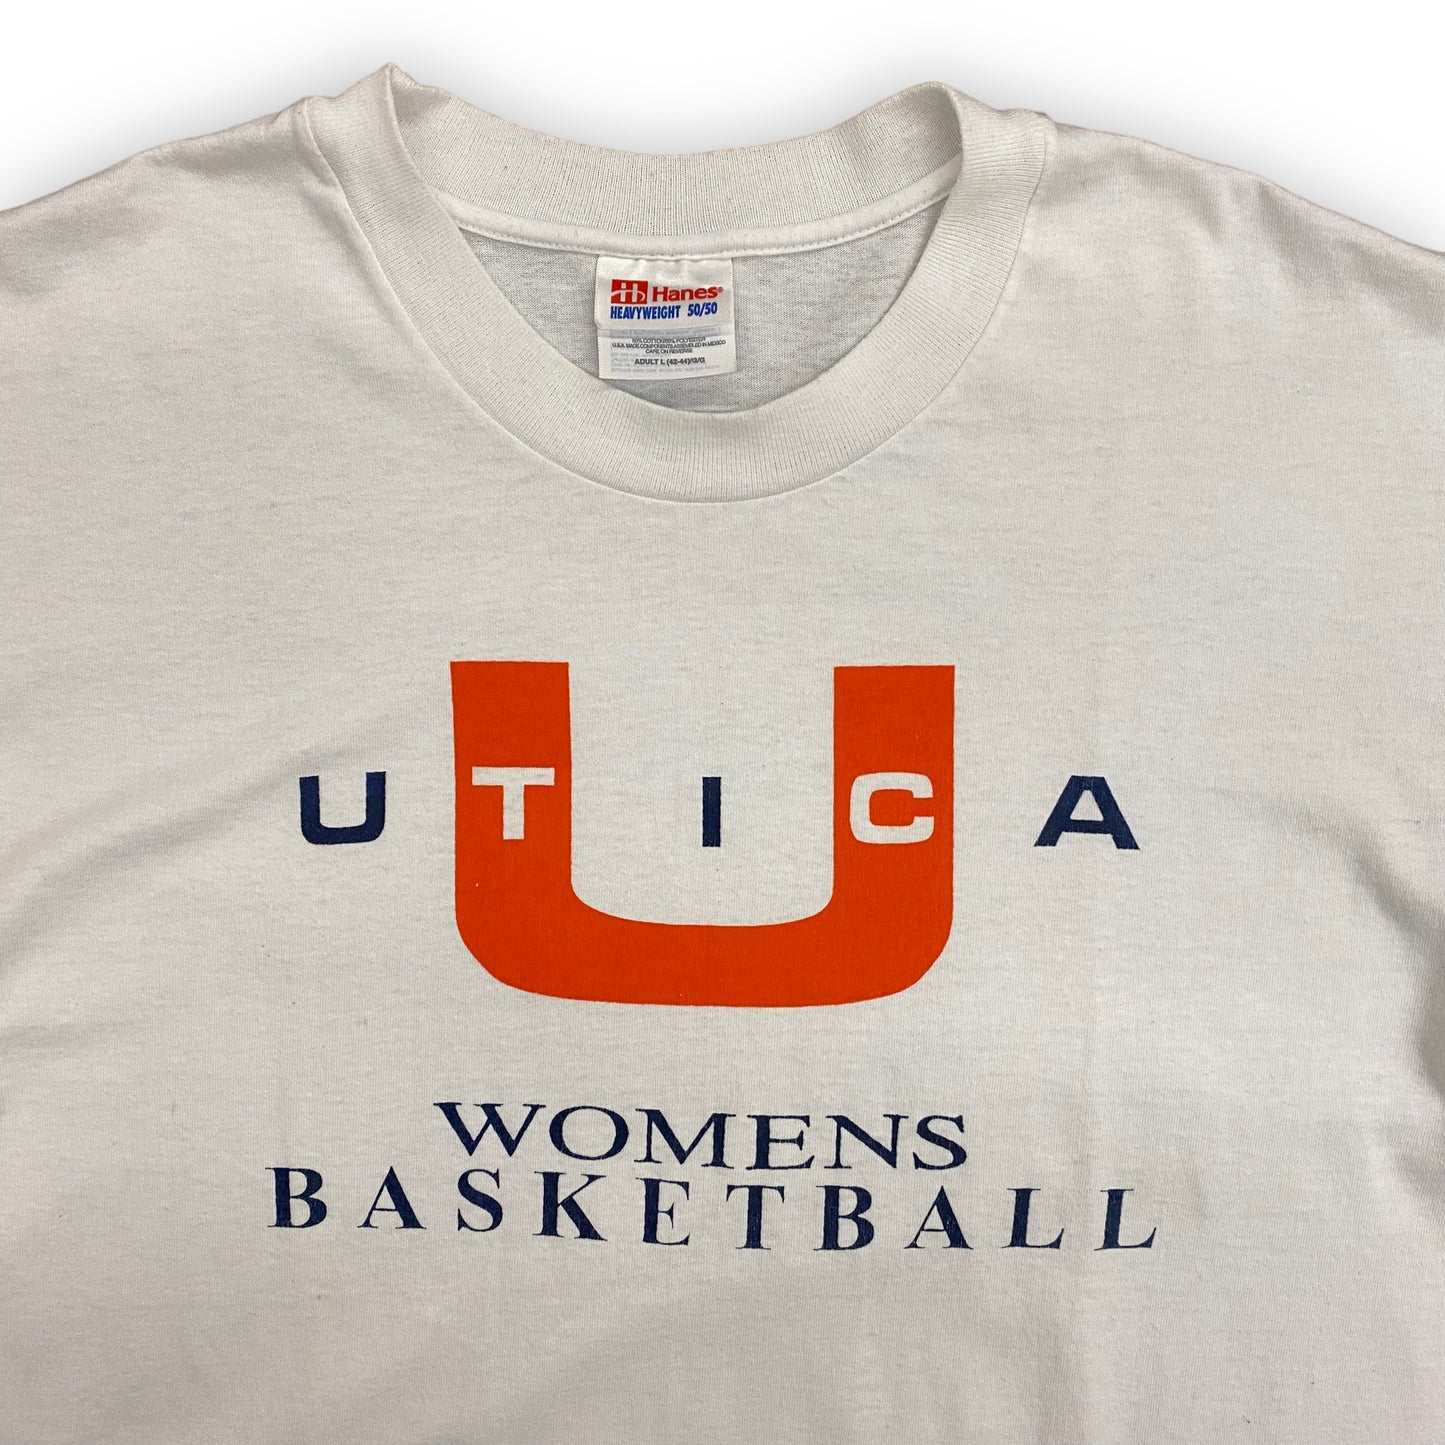 Late 90s Utica College Women's Basketball Tee - Size Large